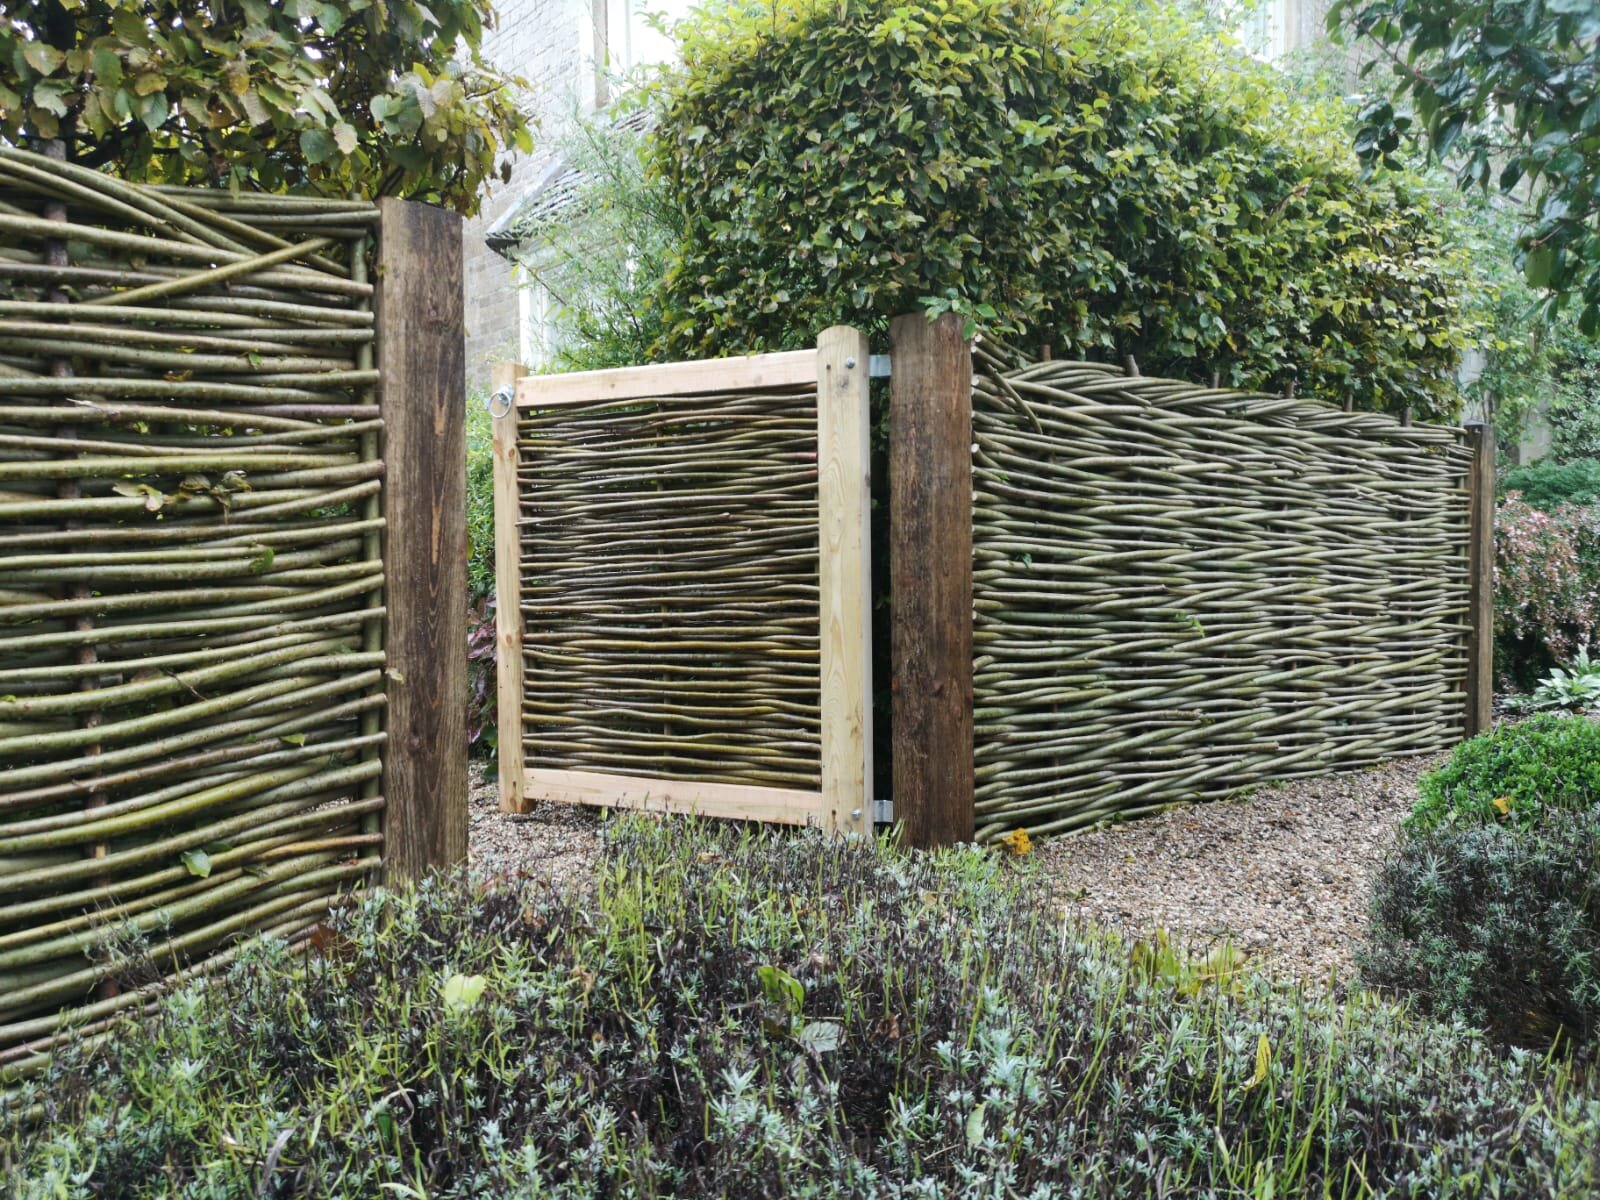 Willow weave fence panels